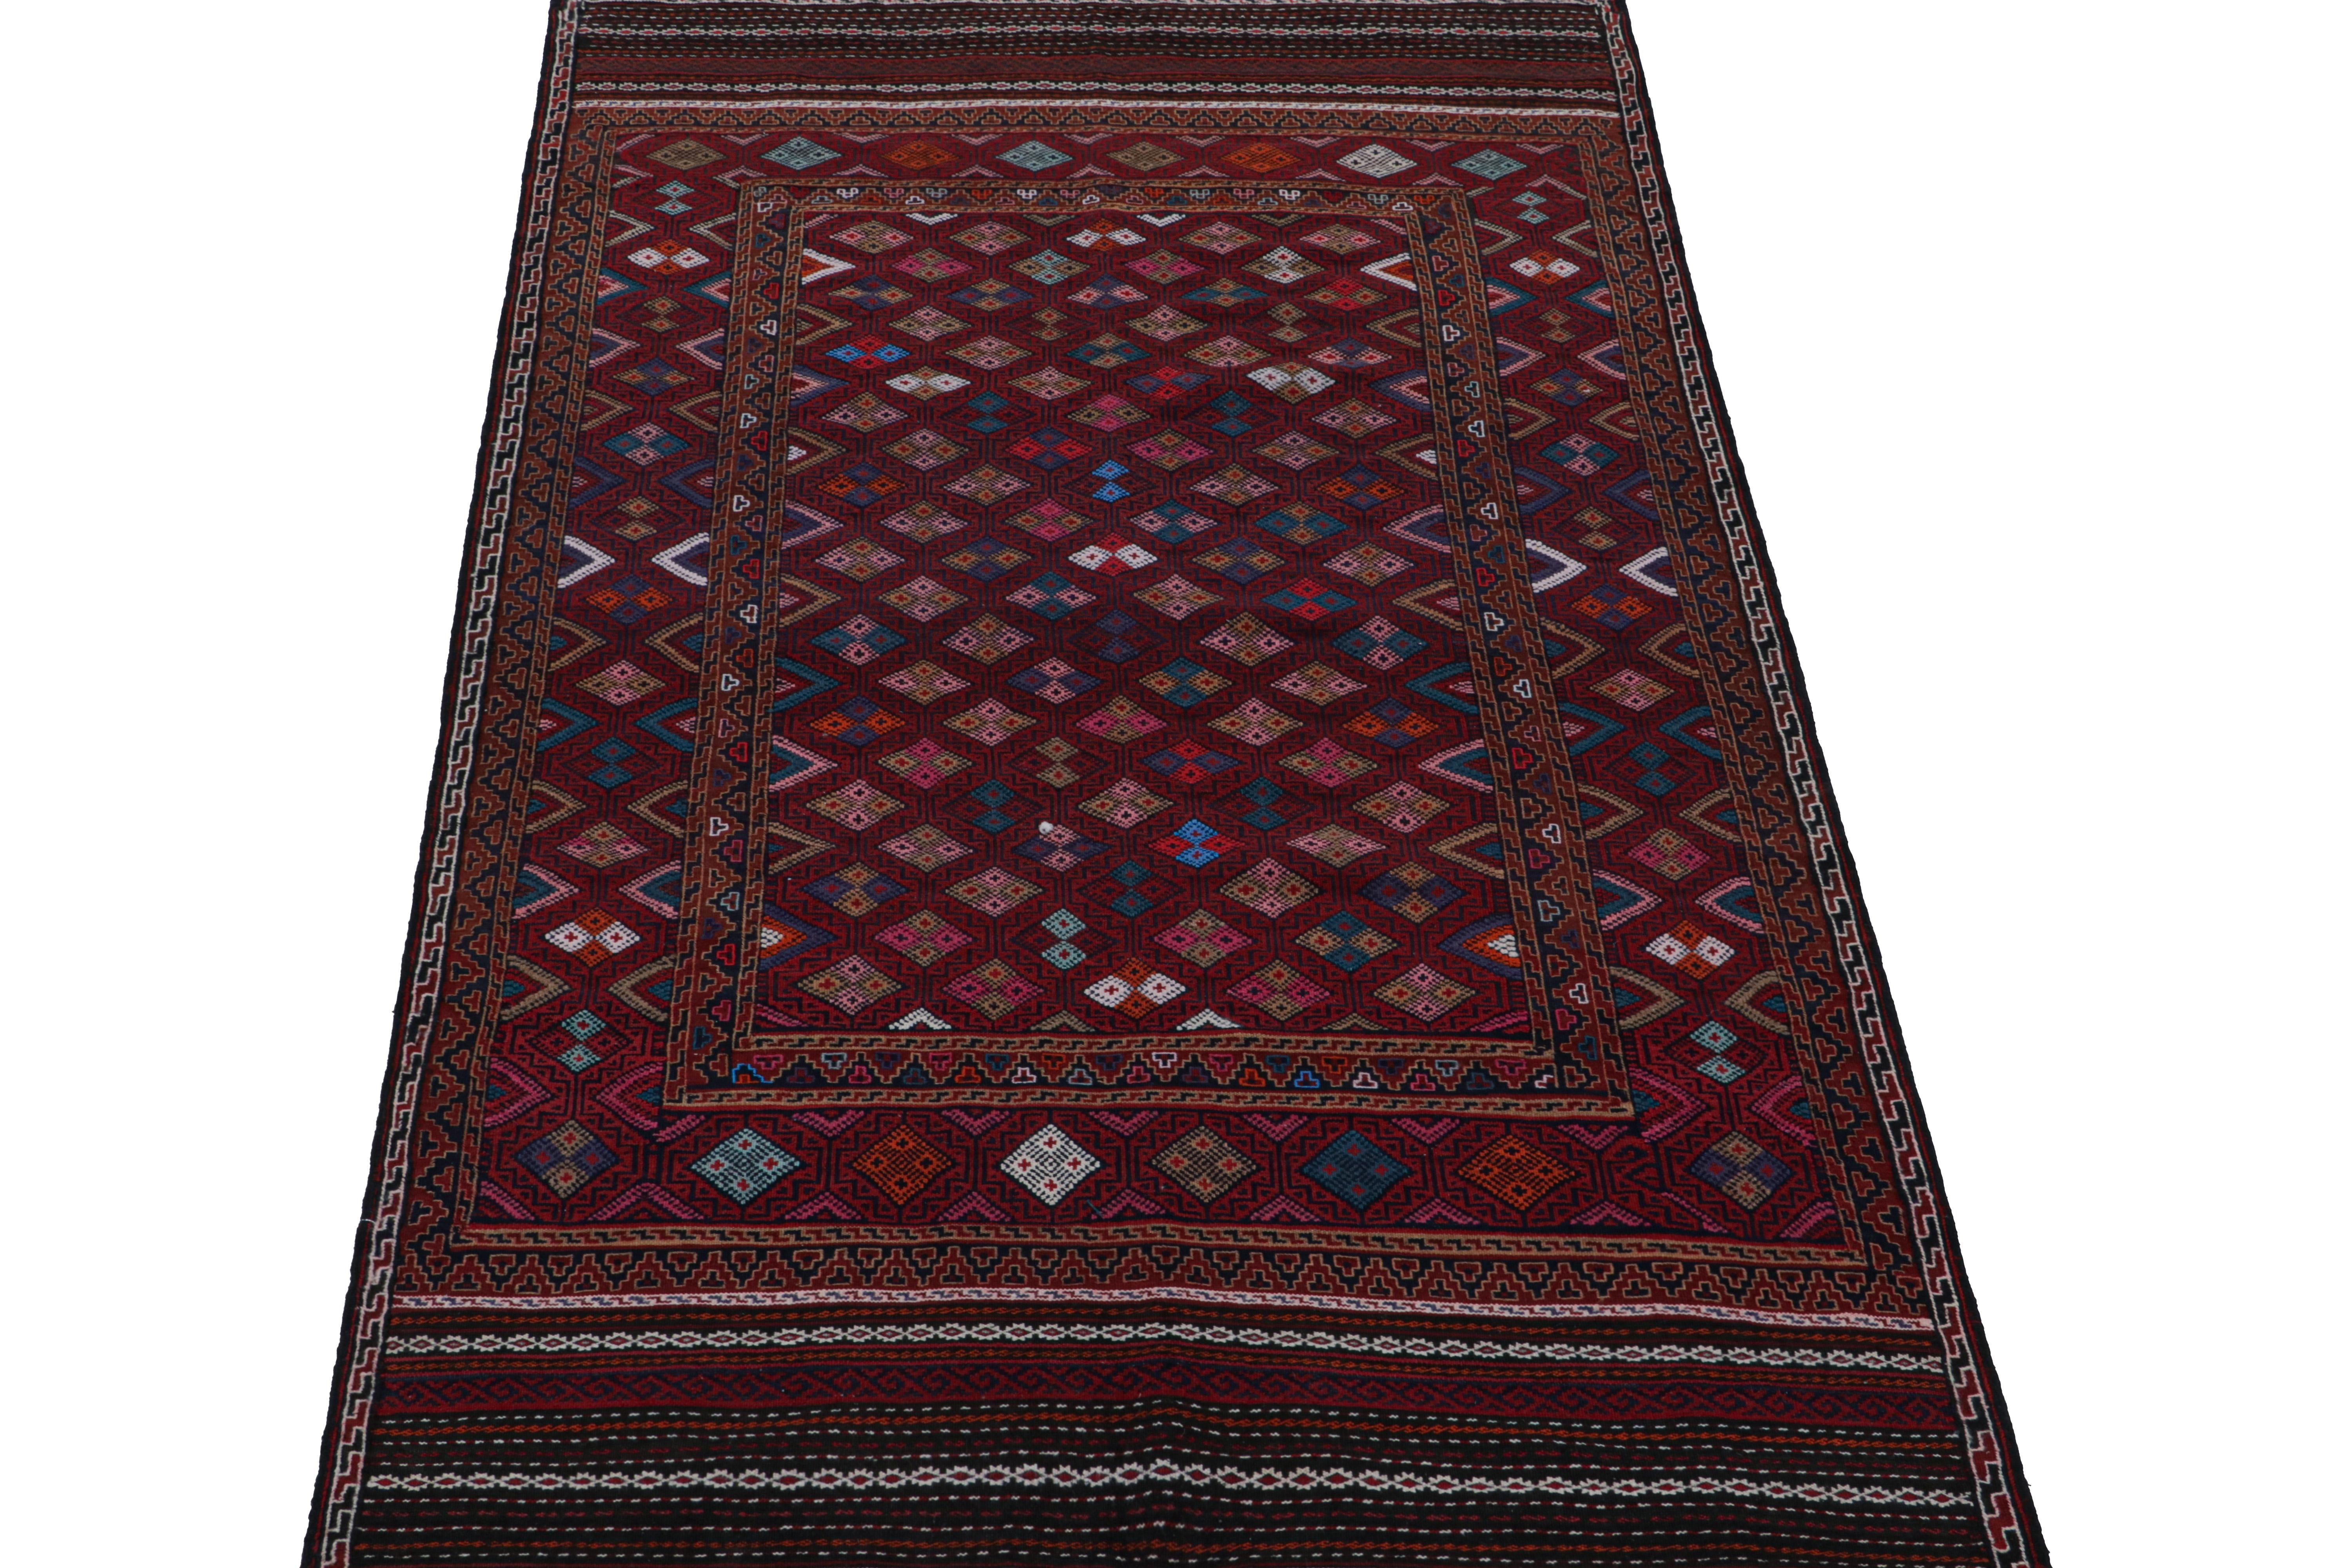 Afghan Vintage Baluch Tribal Kilim in Red with Geometric Patterns, from Rug & Kilim For Sale